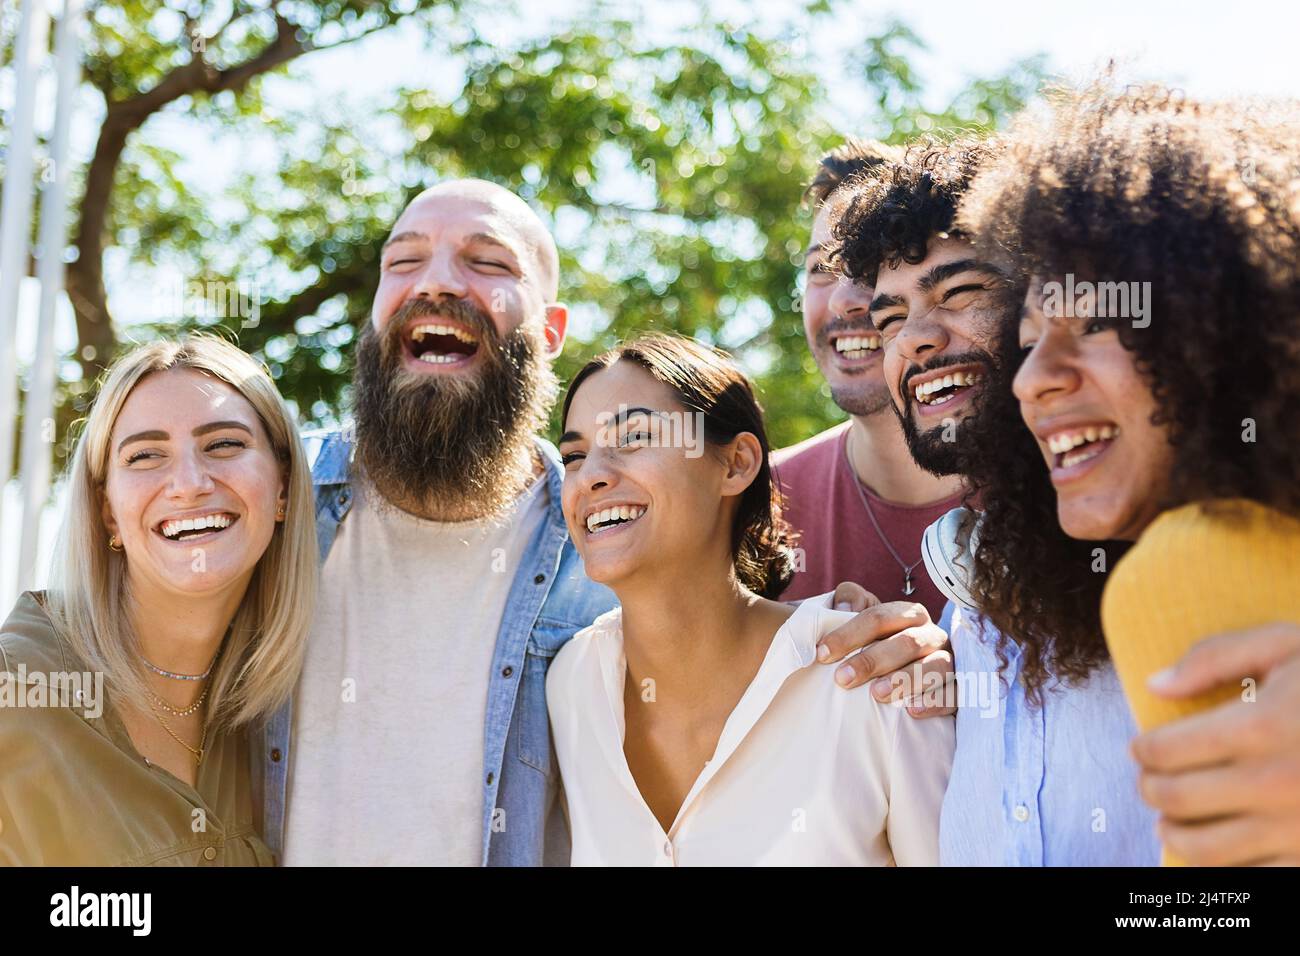 Young group of diverse friends having fun outdoors in a sunny day Stock Photo